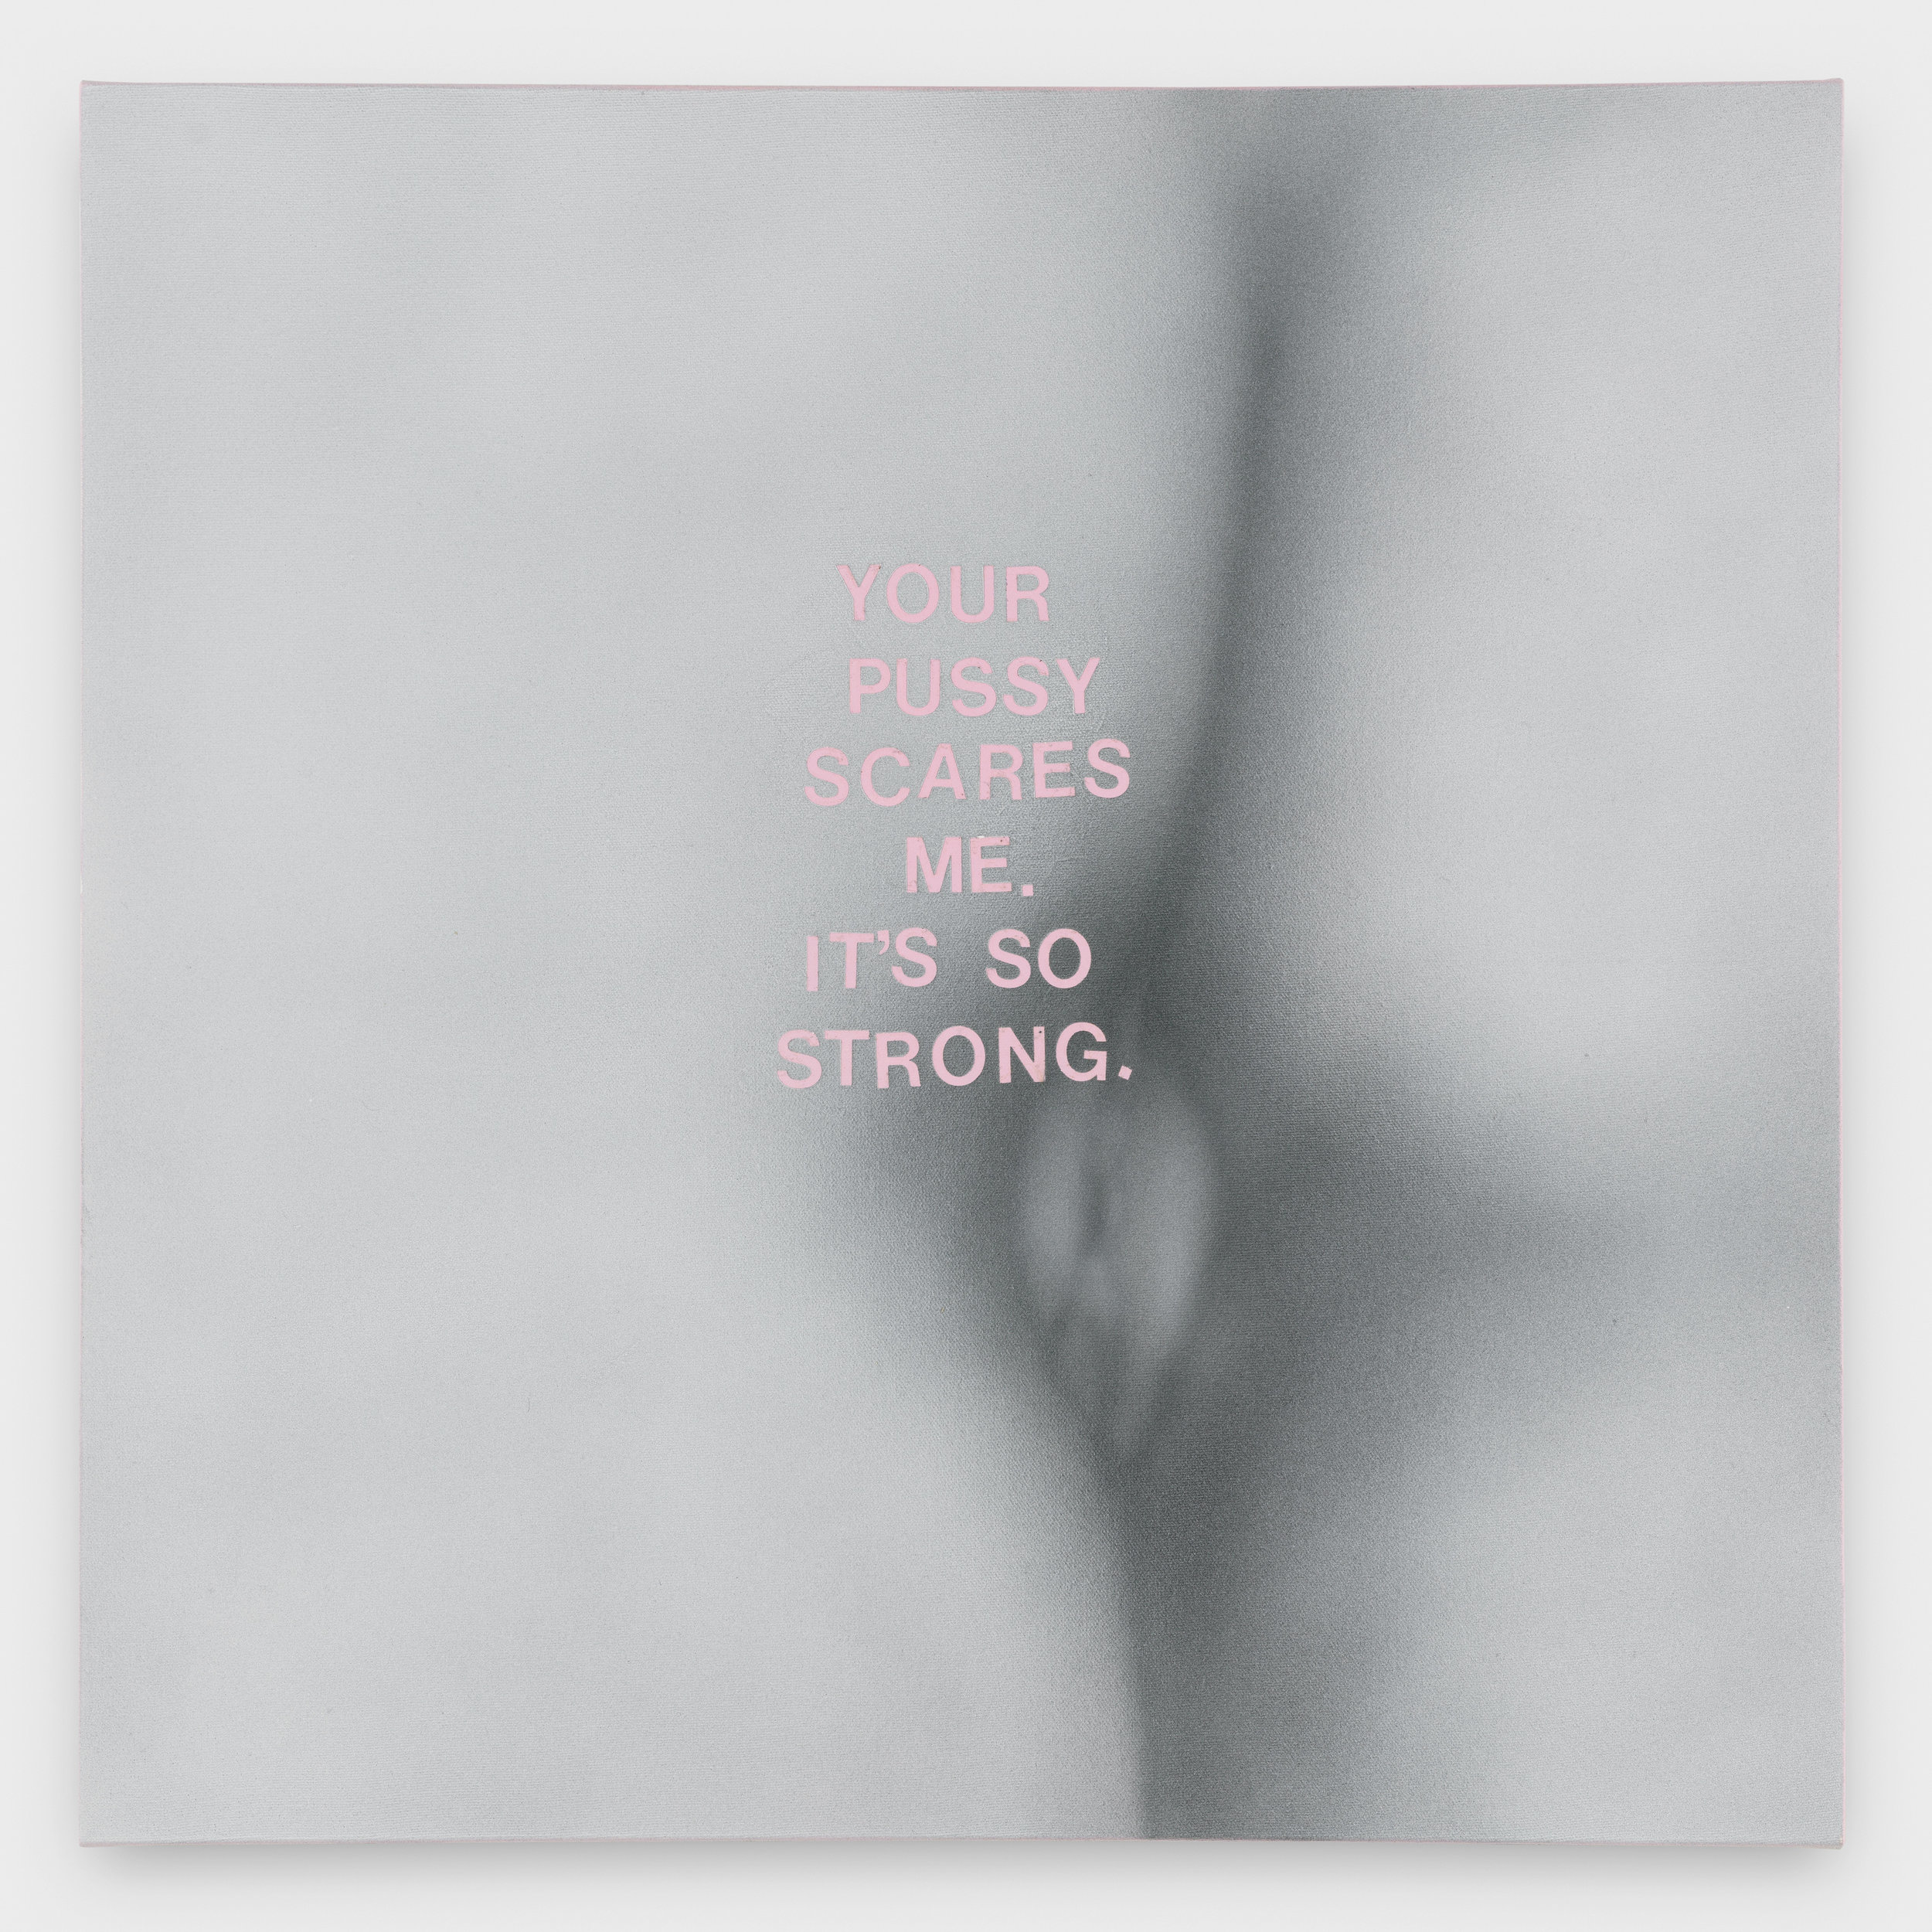 2018_Your pussy..._24 x 24 ins.jpg